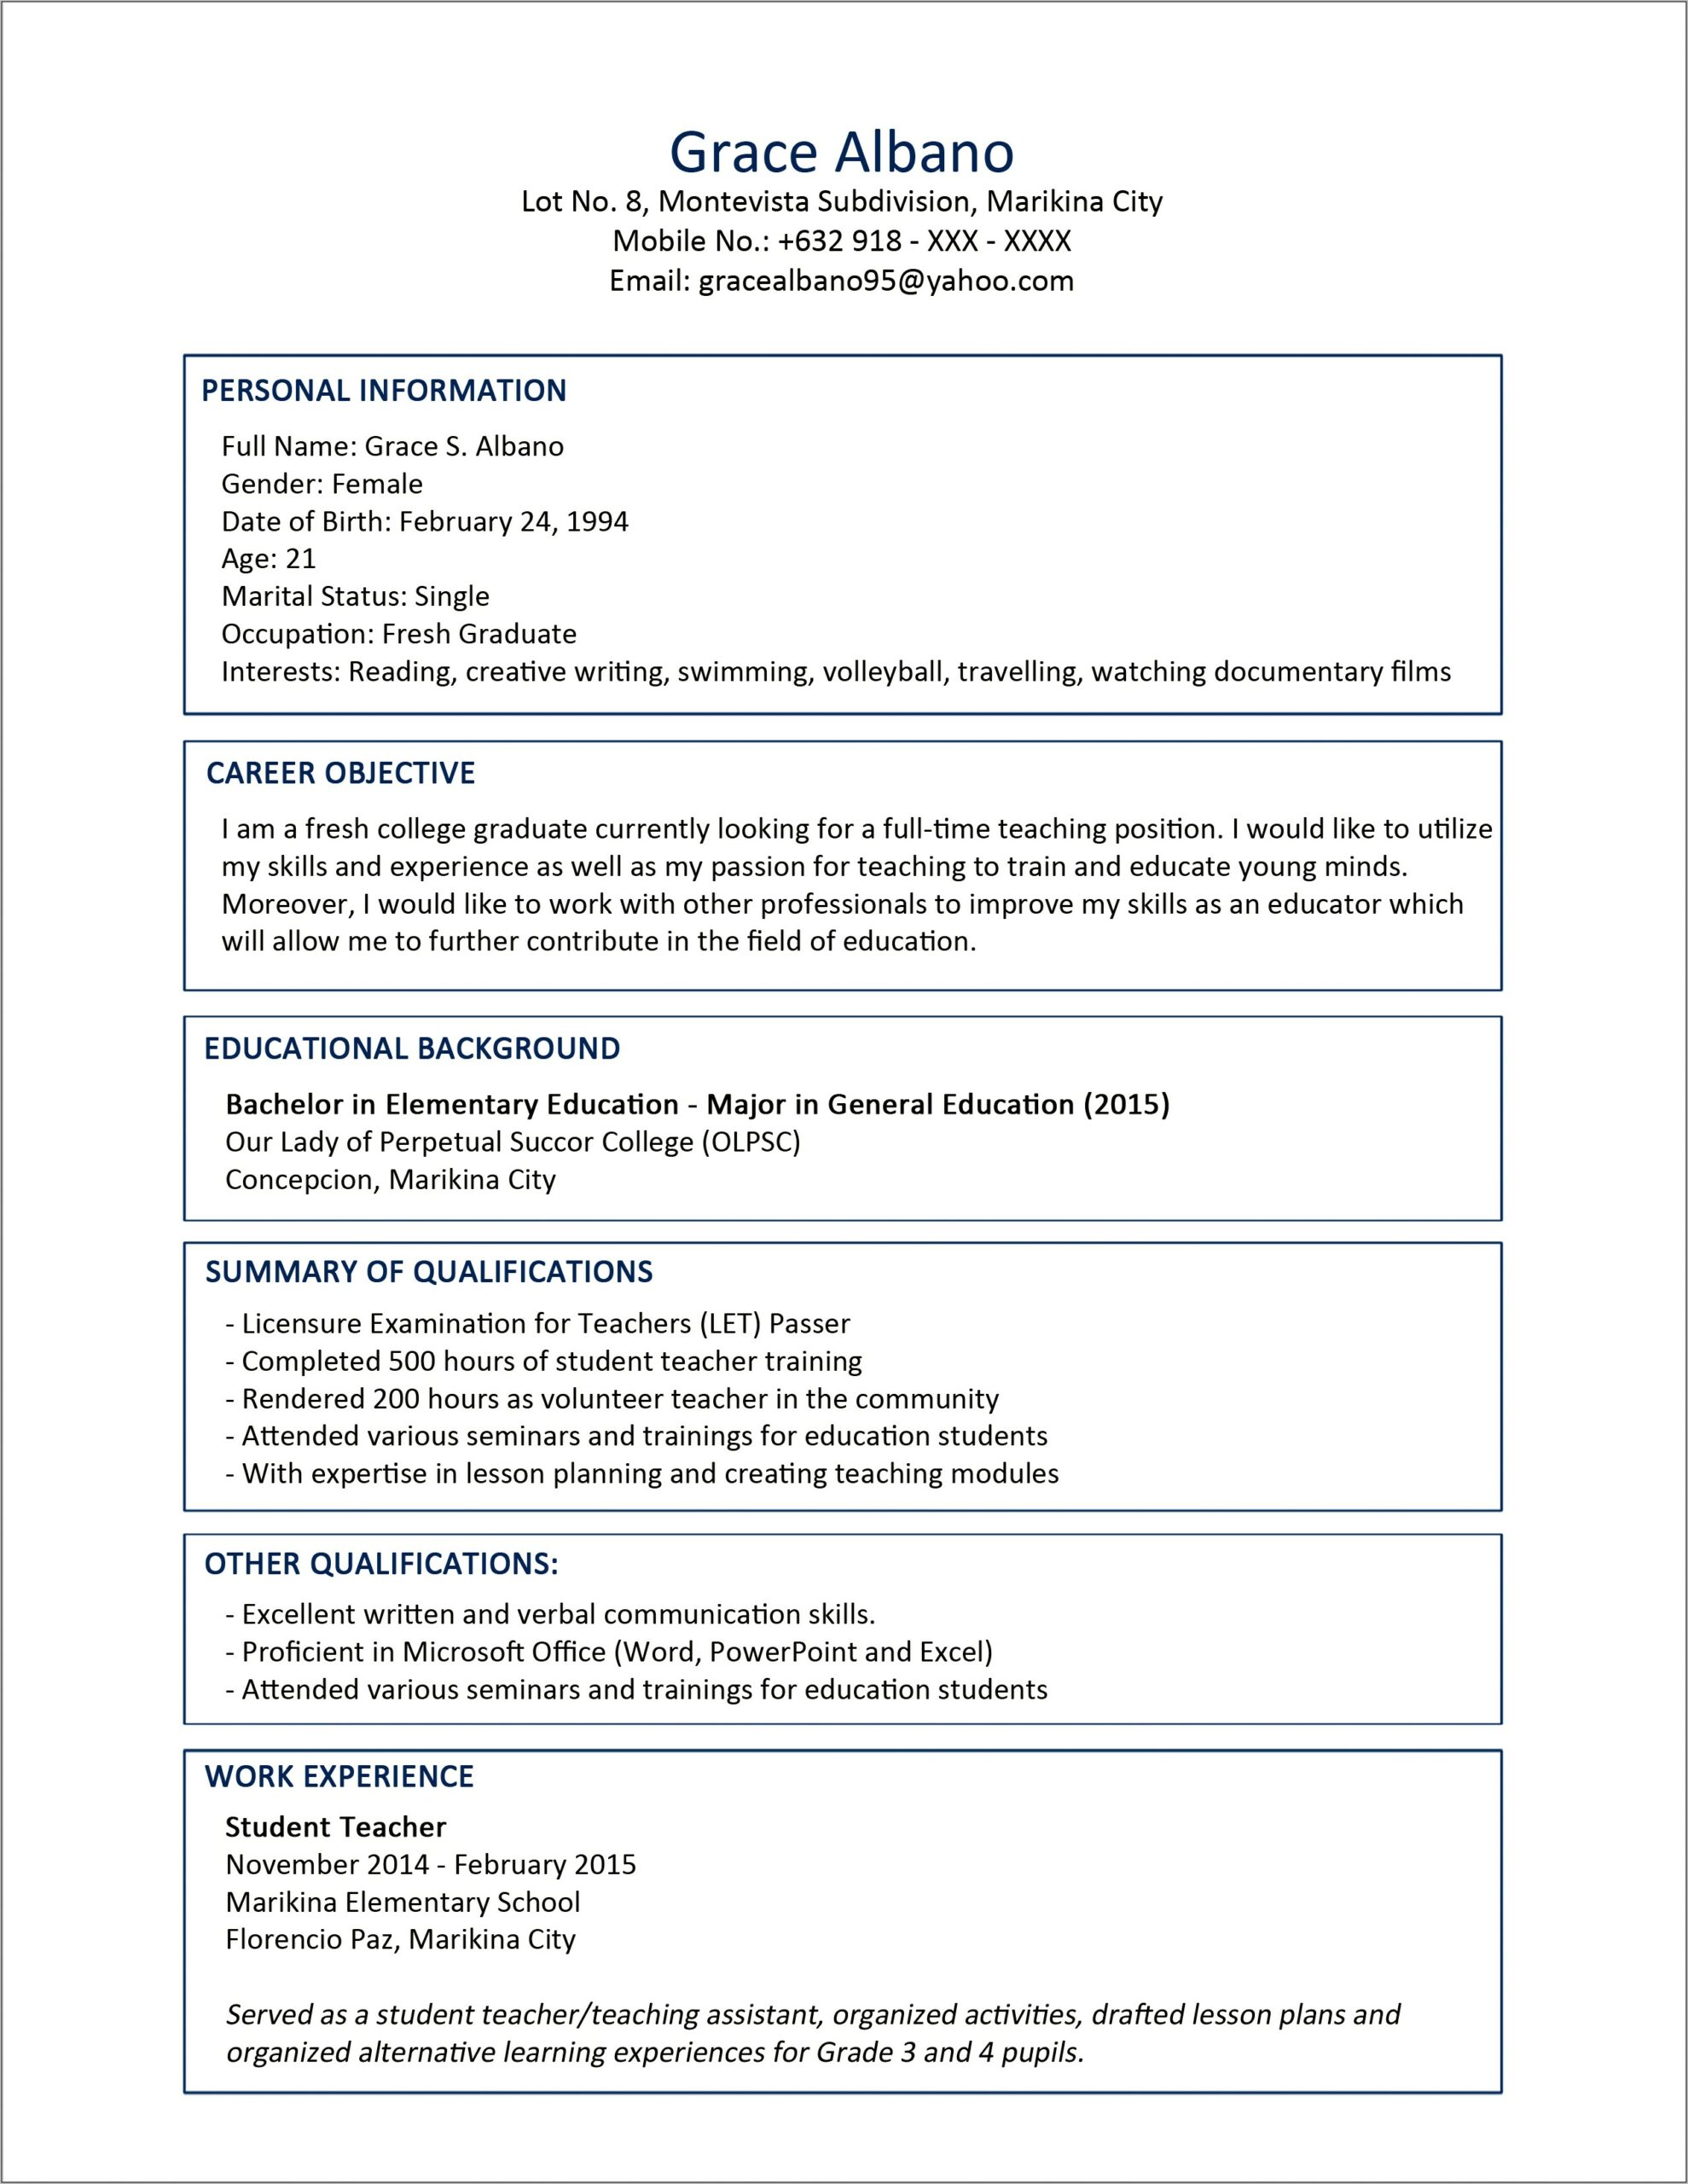 Municipal Government Administrative Objectives For Resumes